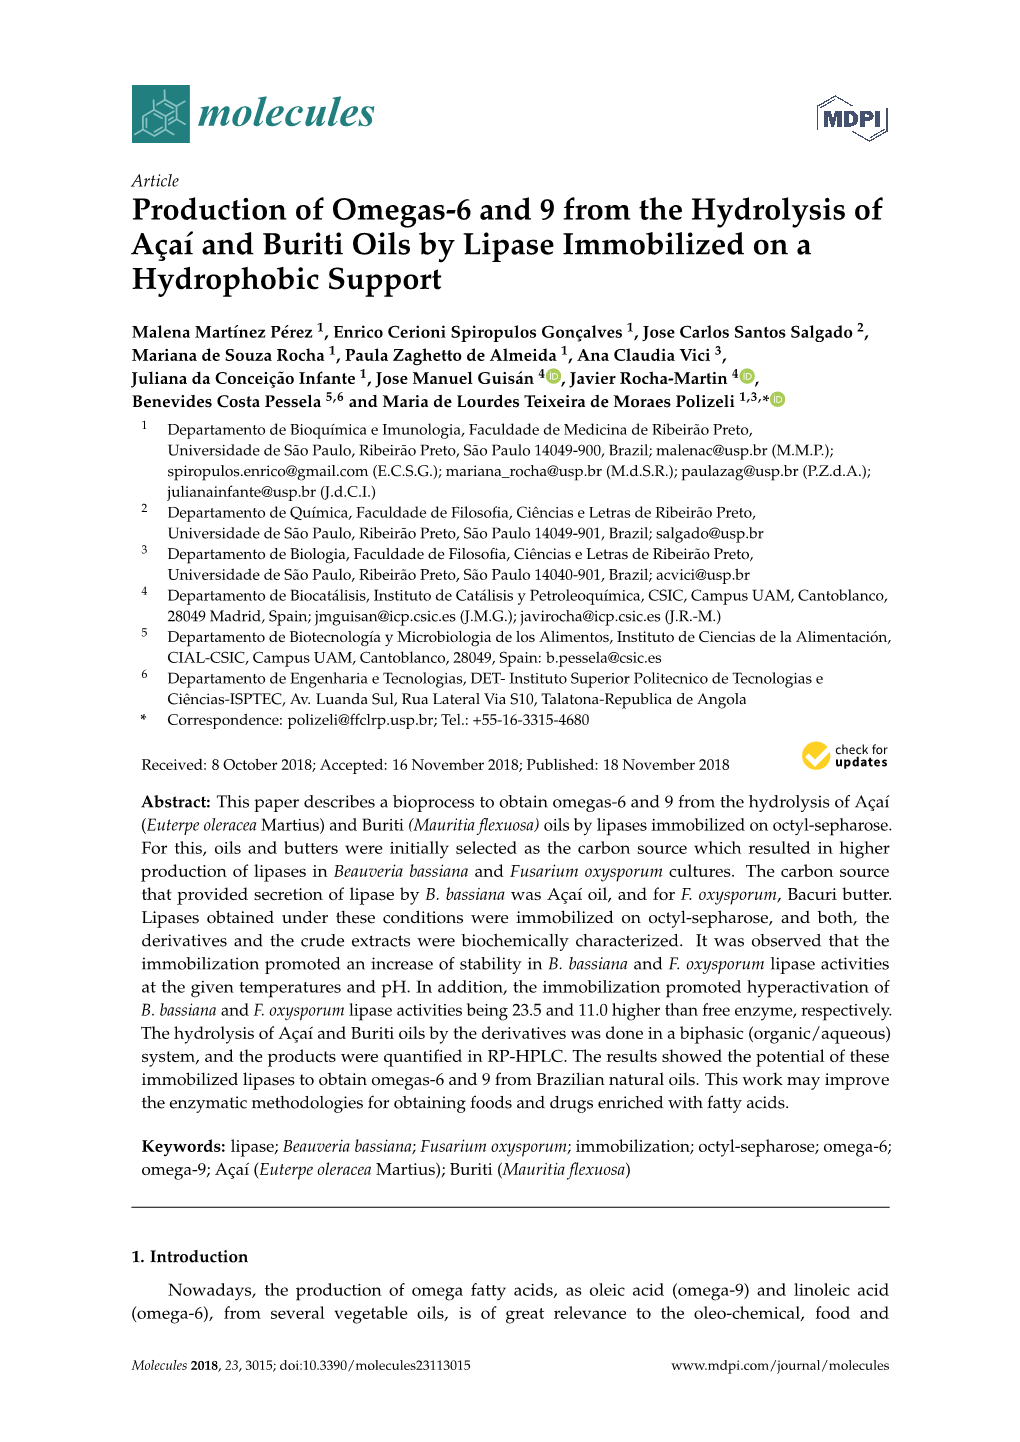 Production of Omegas-6 and 9 from the Hydrolysis of Açaí and Buriti Oils by Lipase Immobilized on a Hydrophobic Support